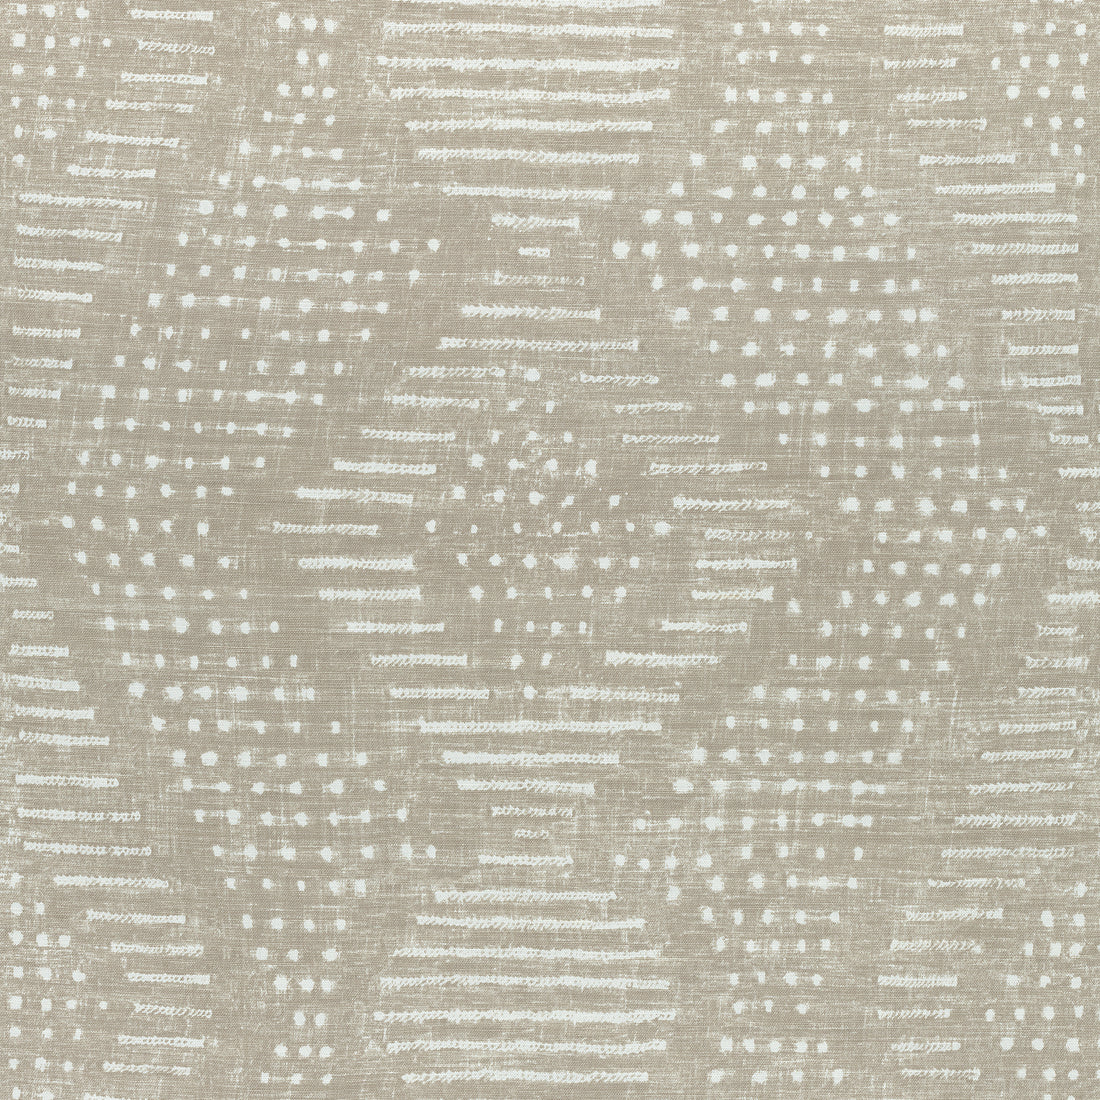 Mali fabric in flax color - pattern number AF78718 - by Anna French in the Palampore collection